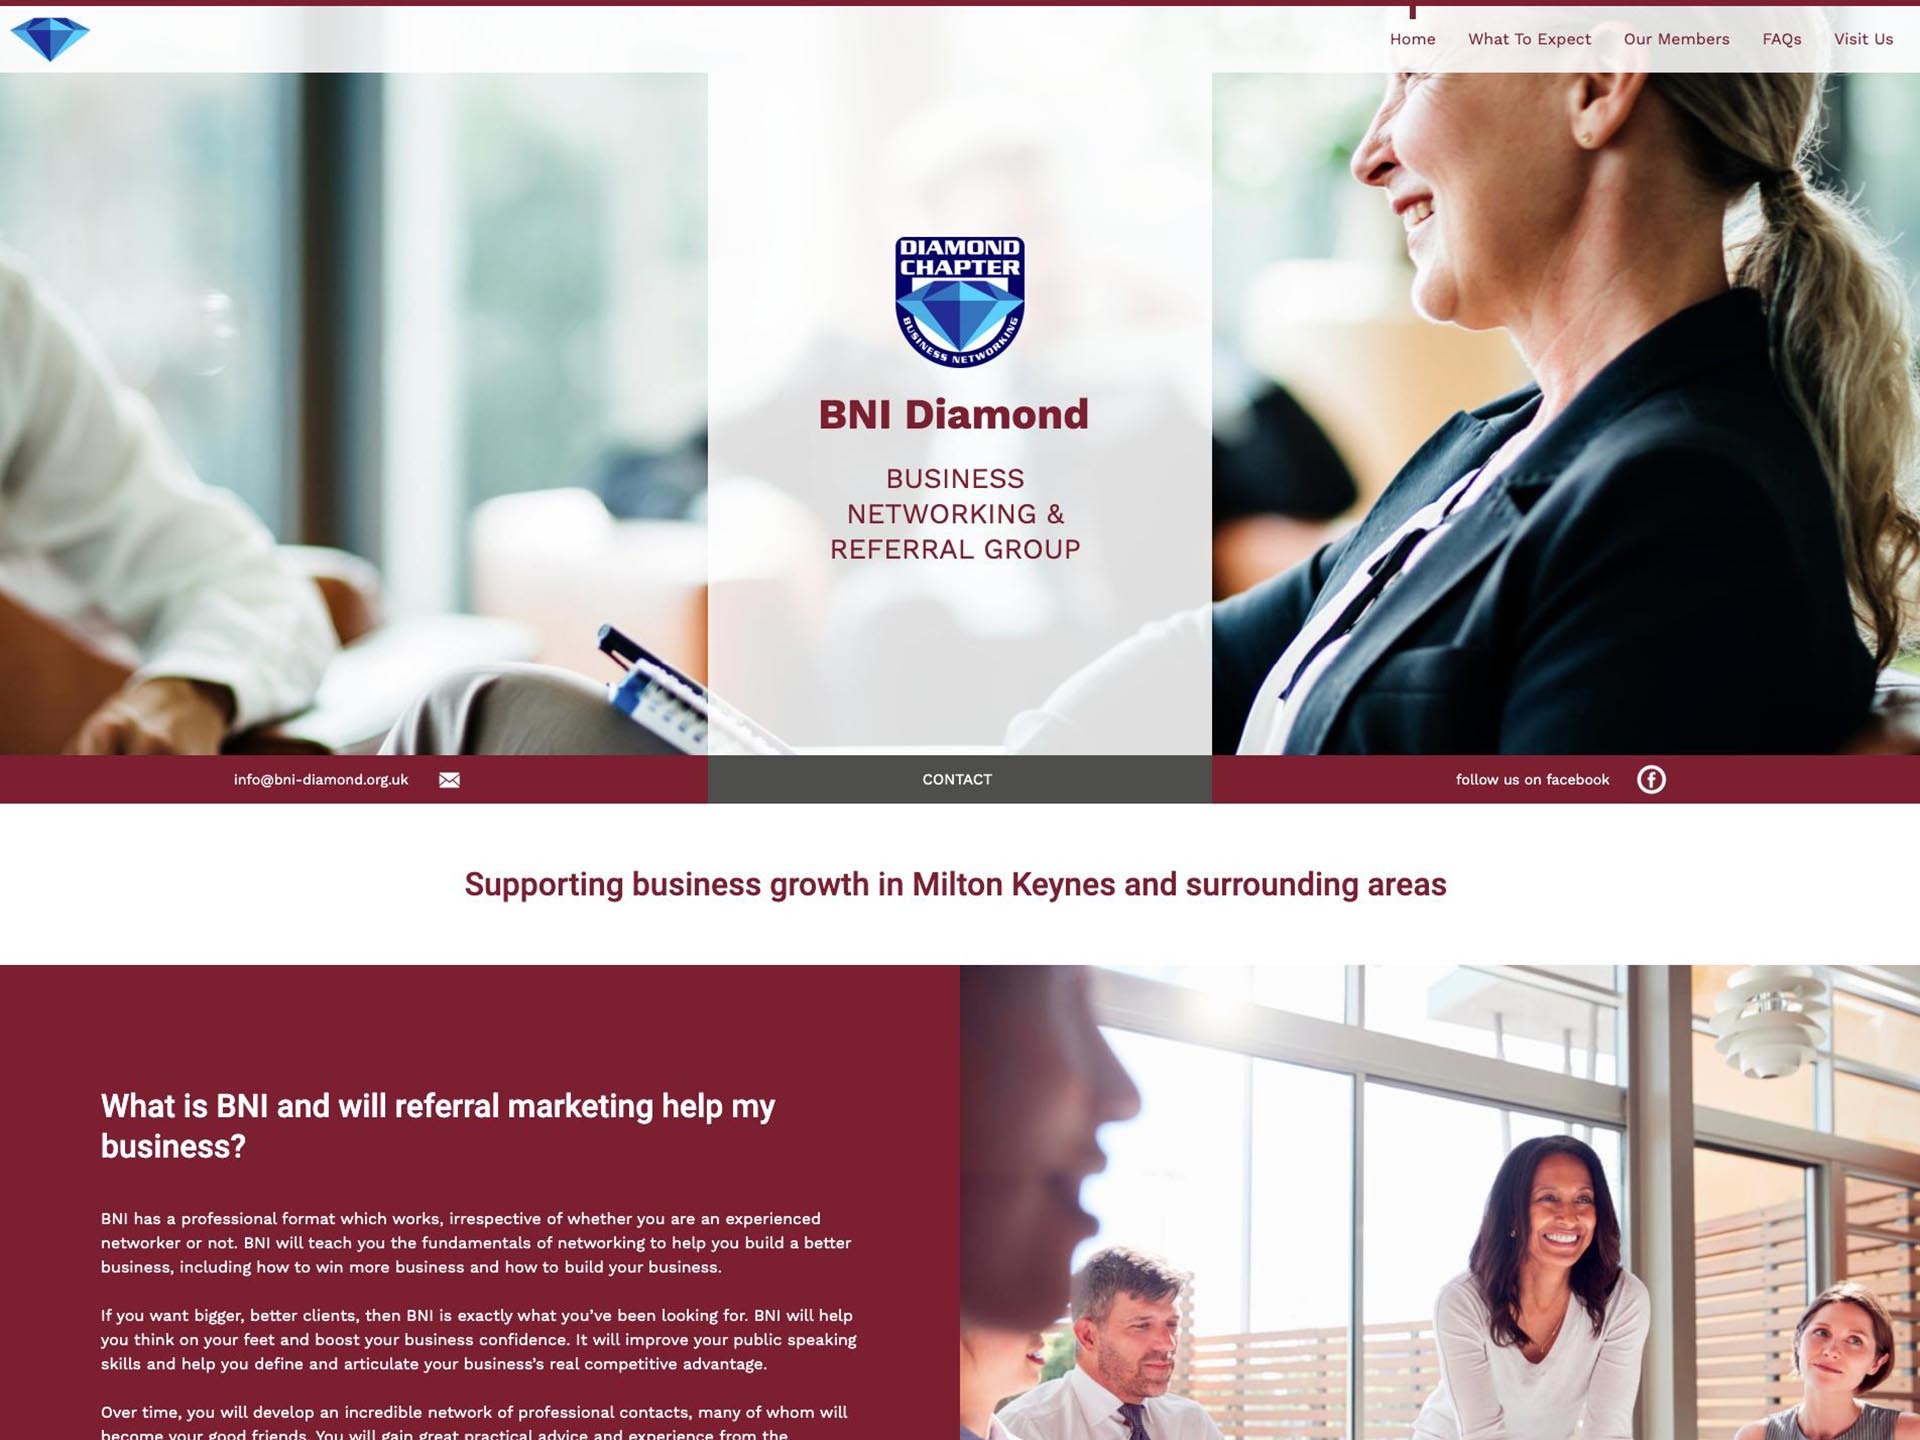 A website design to support business growth in Milton Keynes